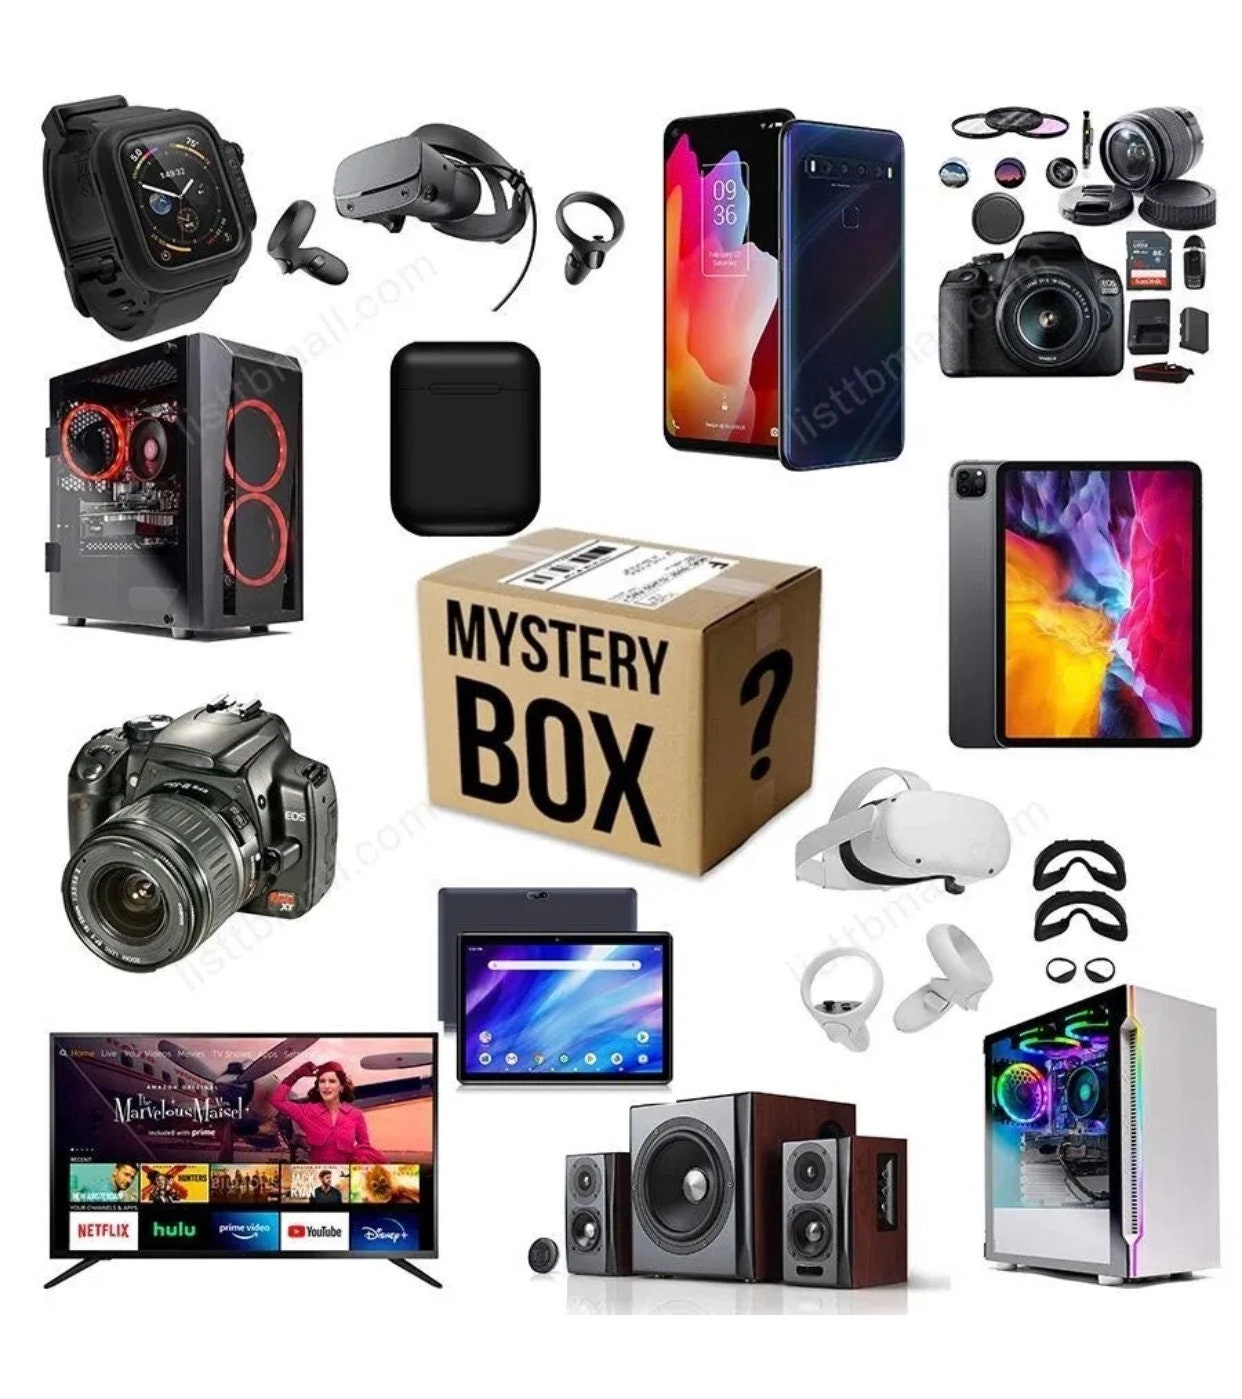 Branded Mystery Box Electronics Gift Box + Surprise(!) – Mystery